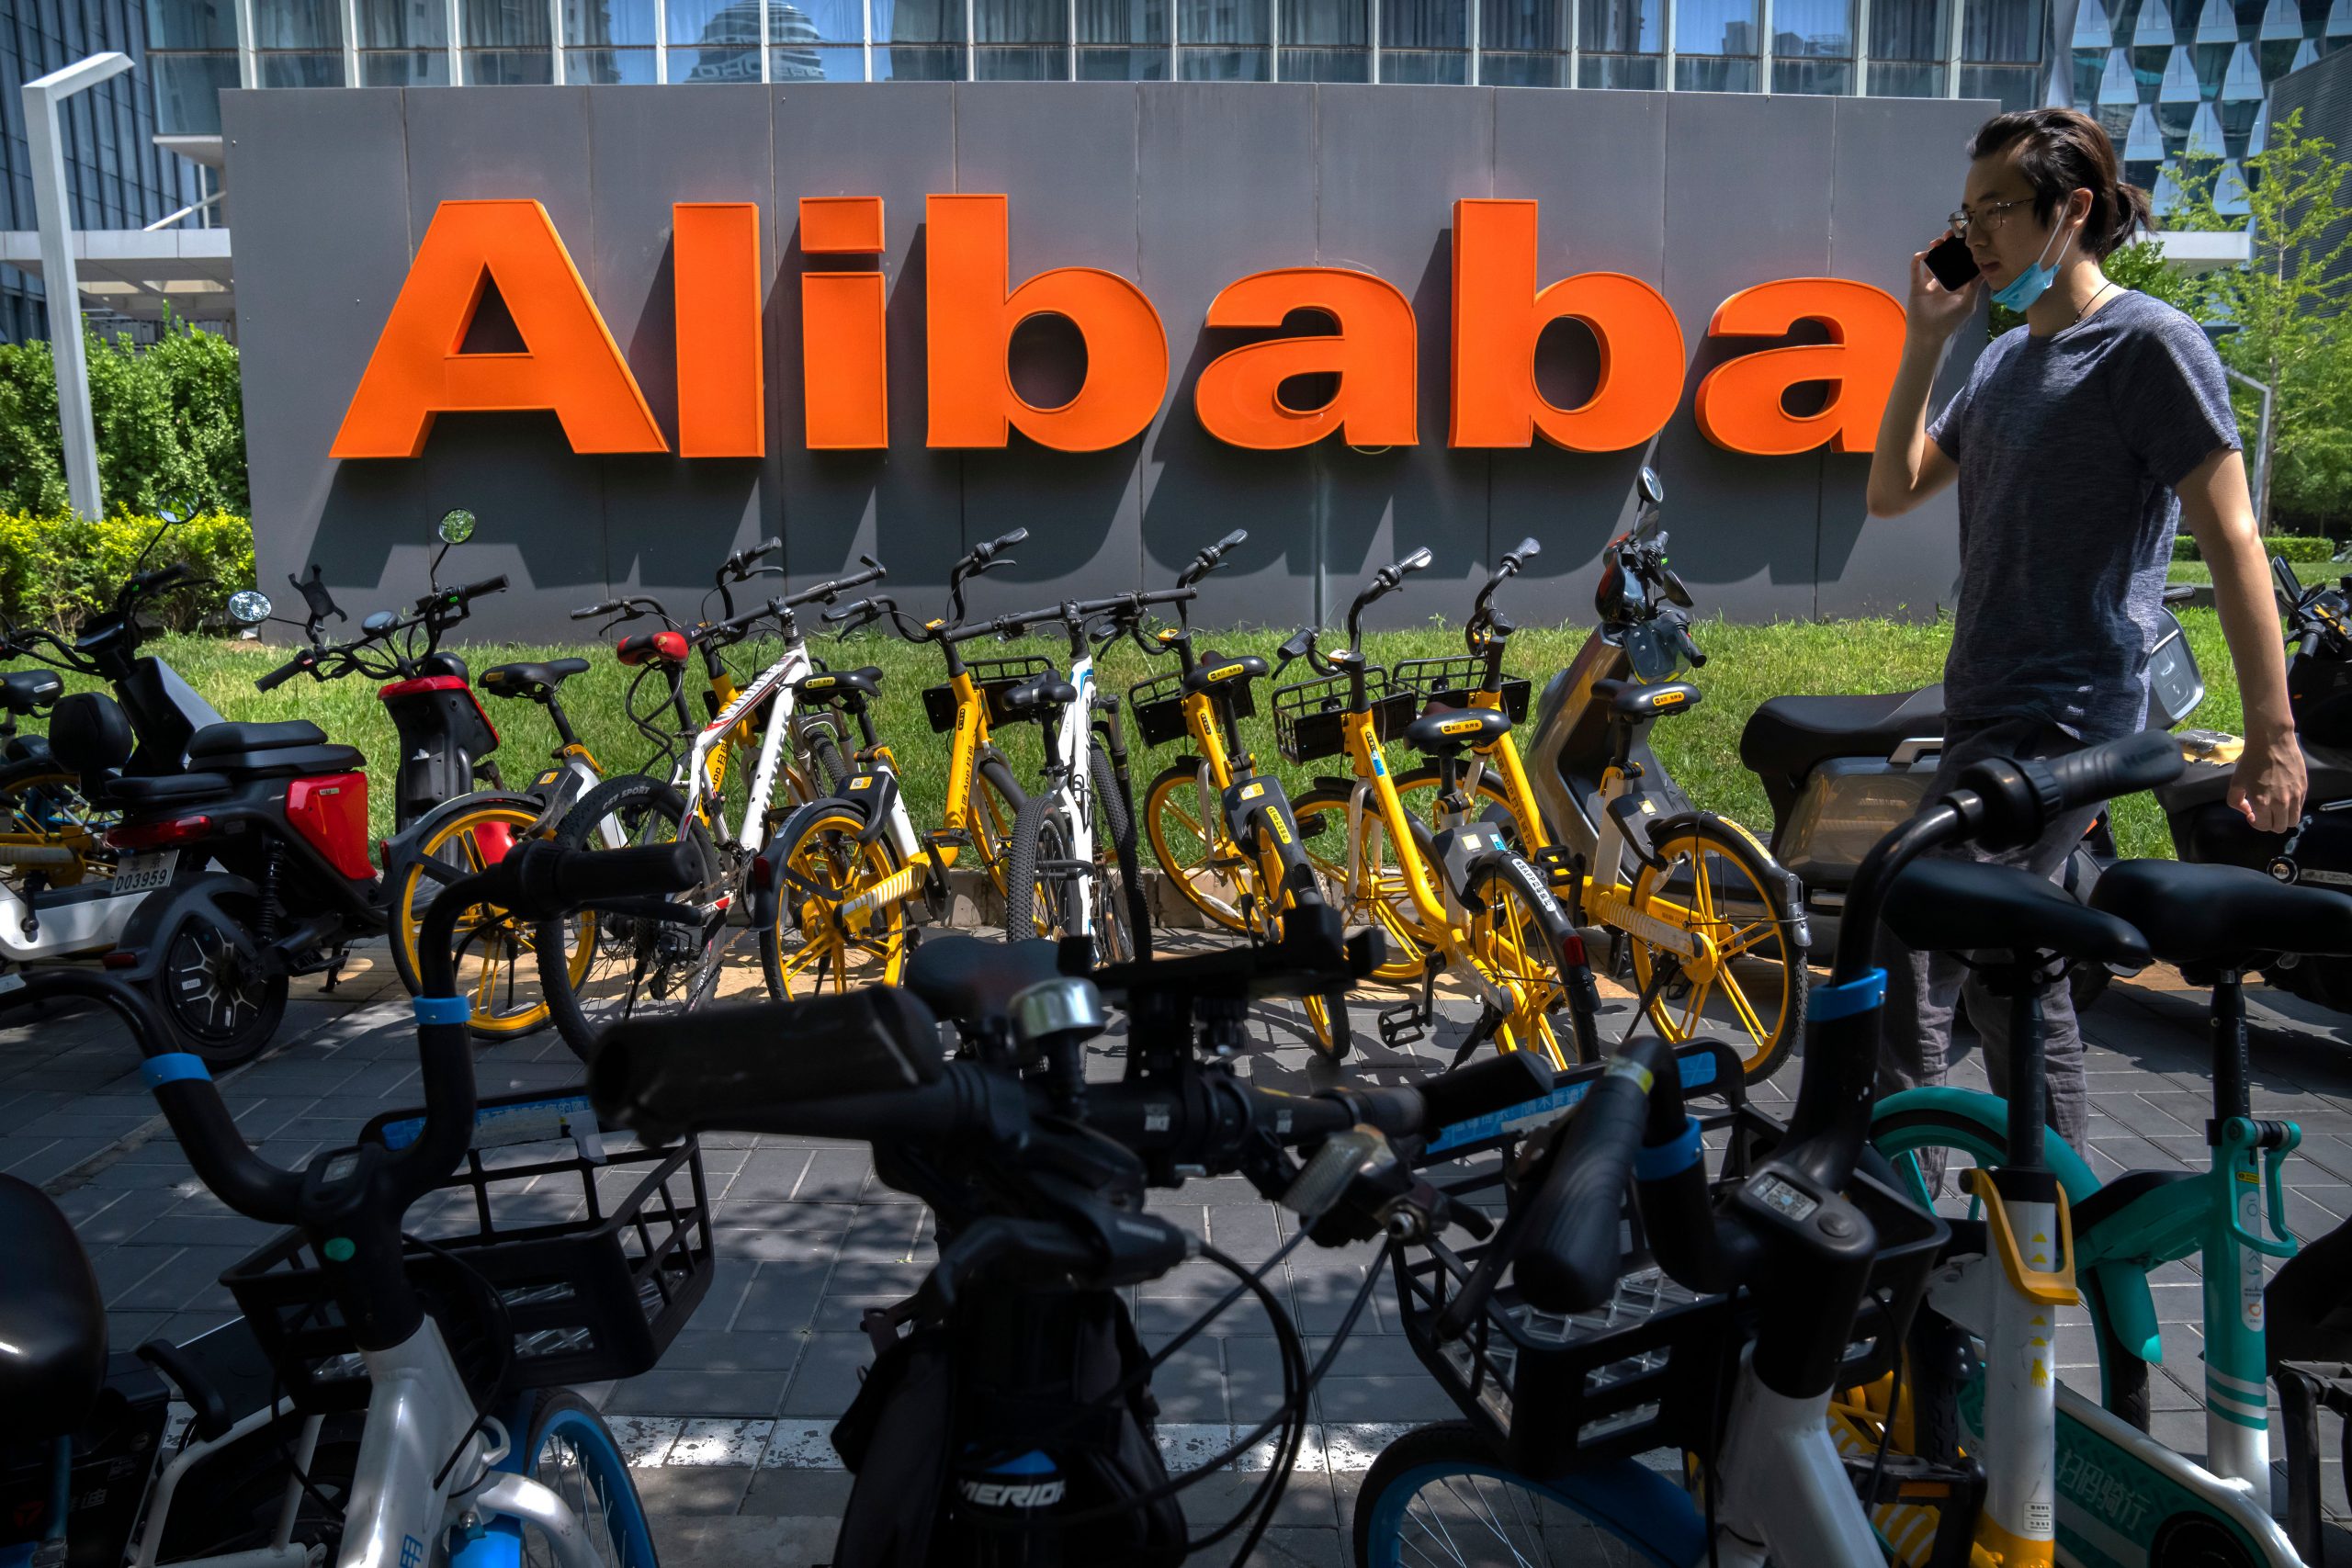 Alibaba hit by Covid reports 60% decline in full-year profits